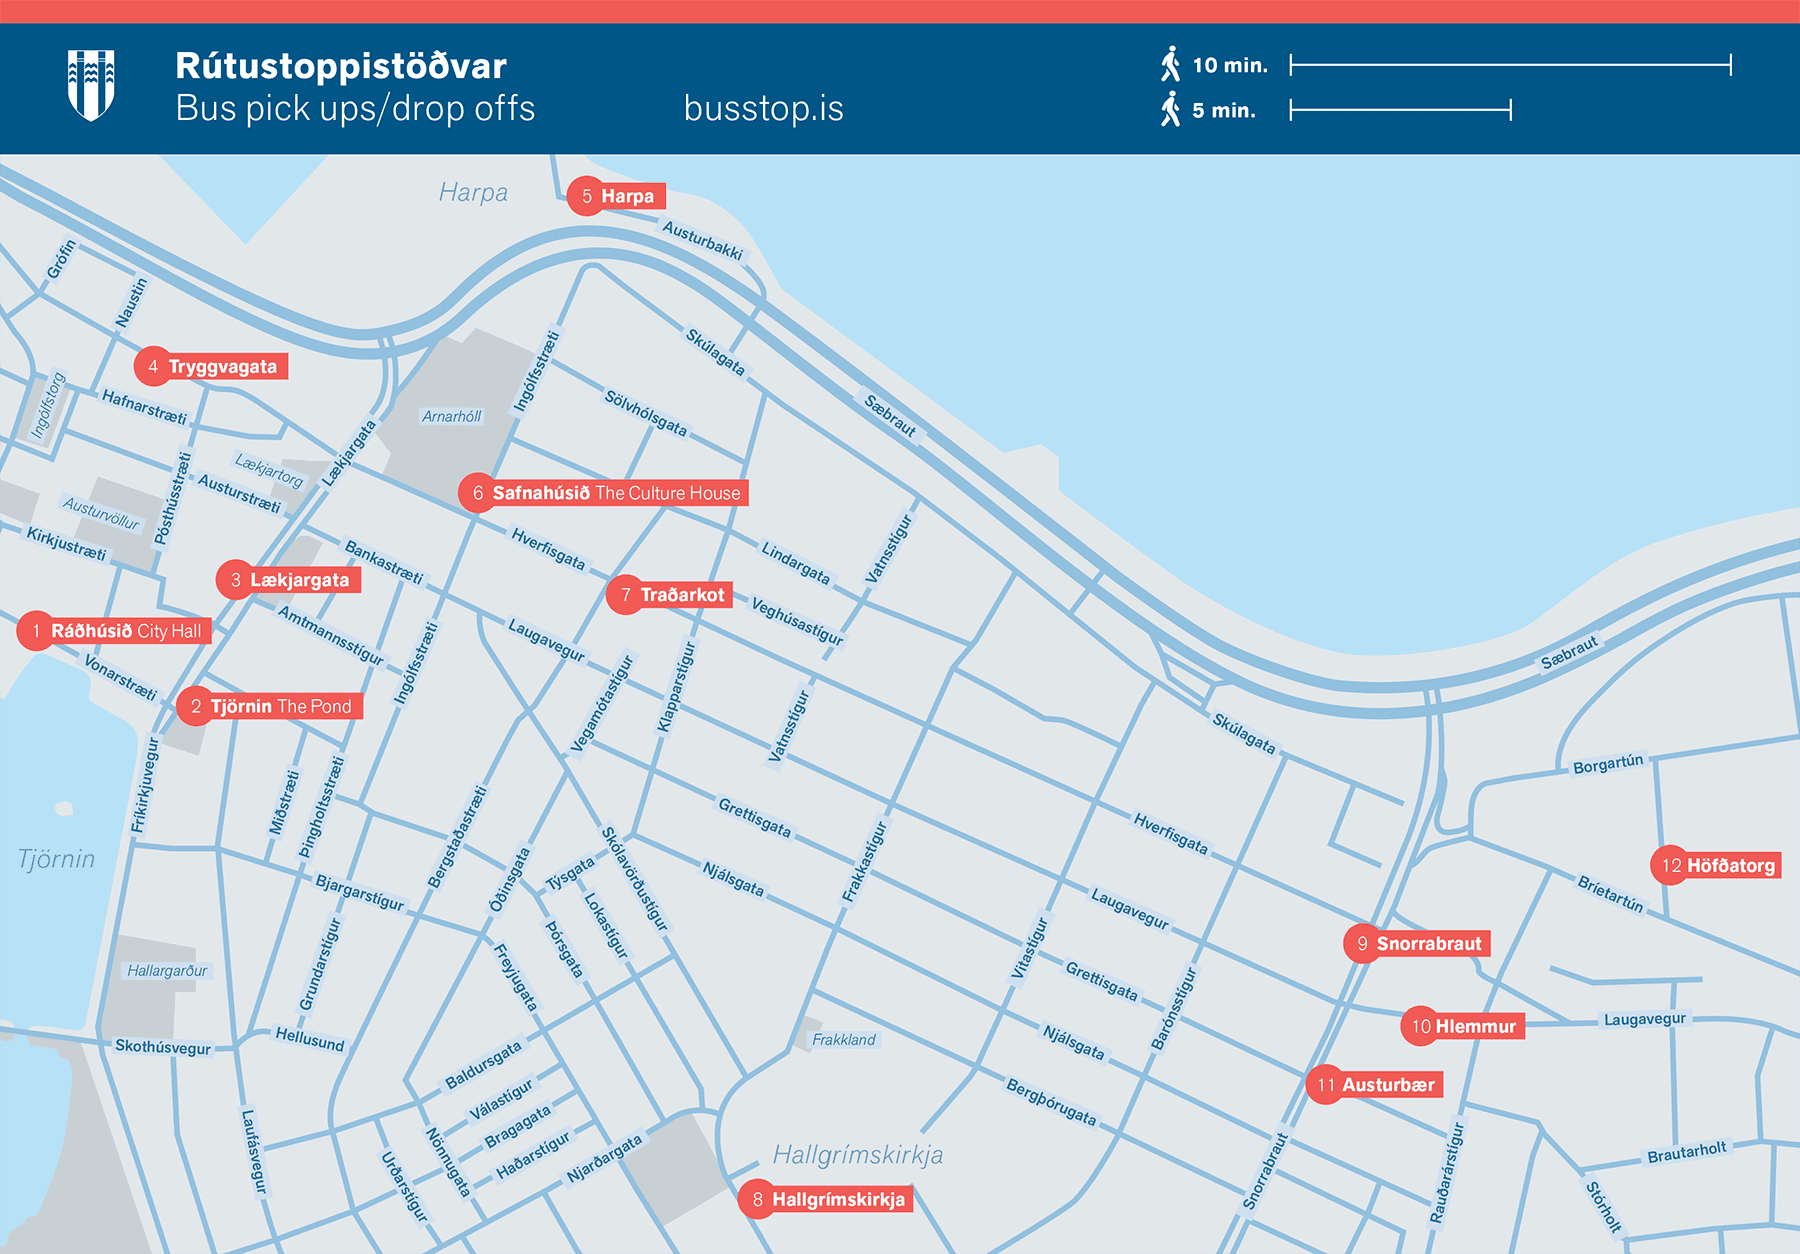 Reykjavik bus pick ups and drop off map showing bus stops